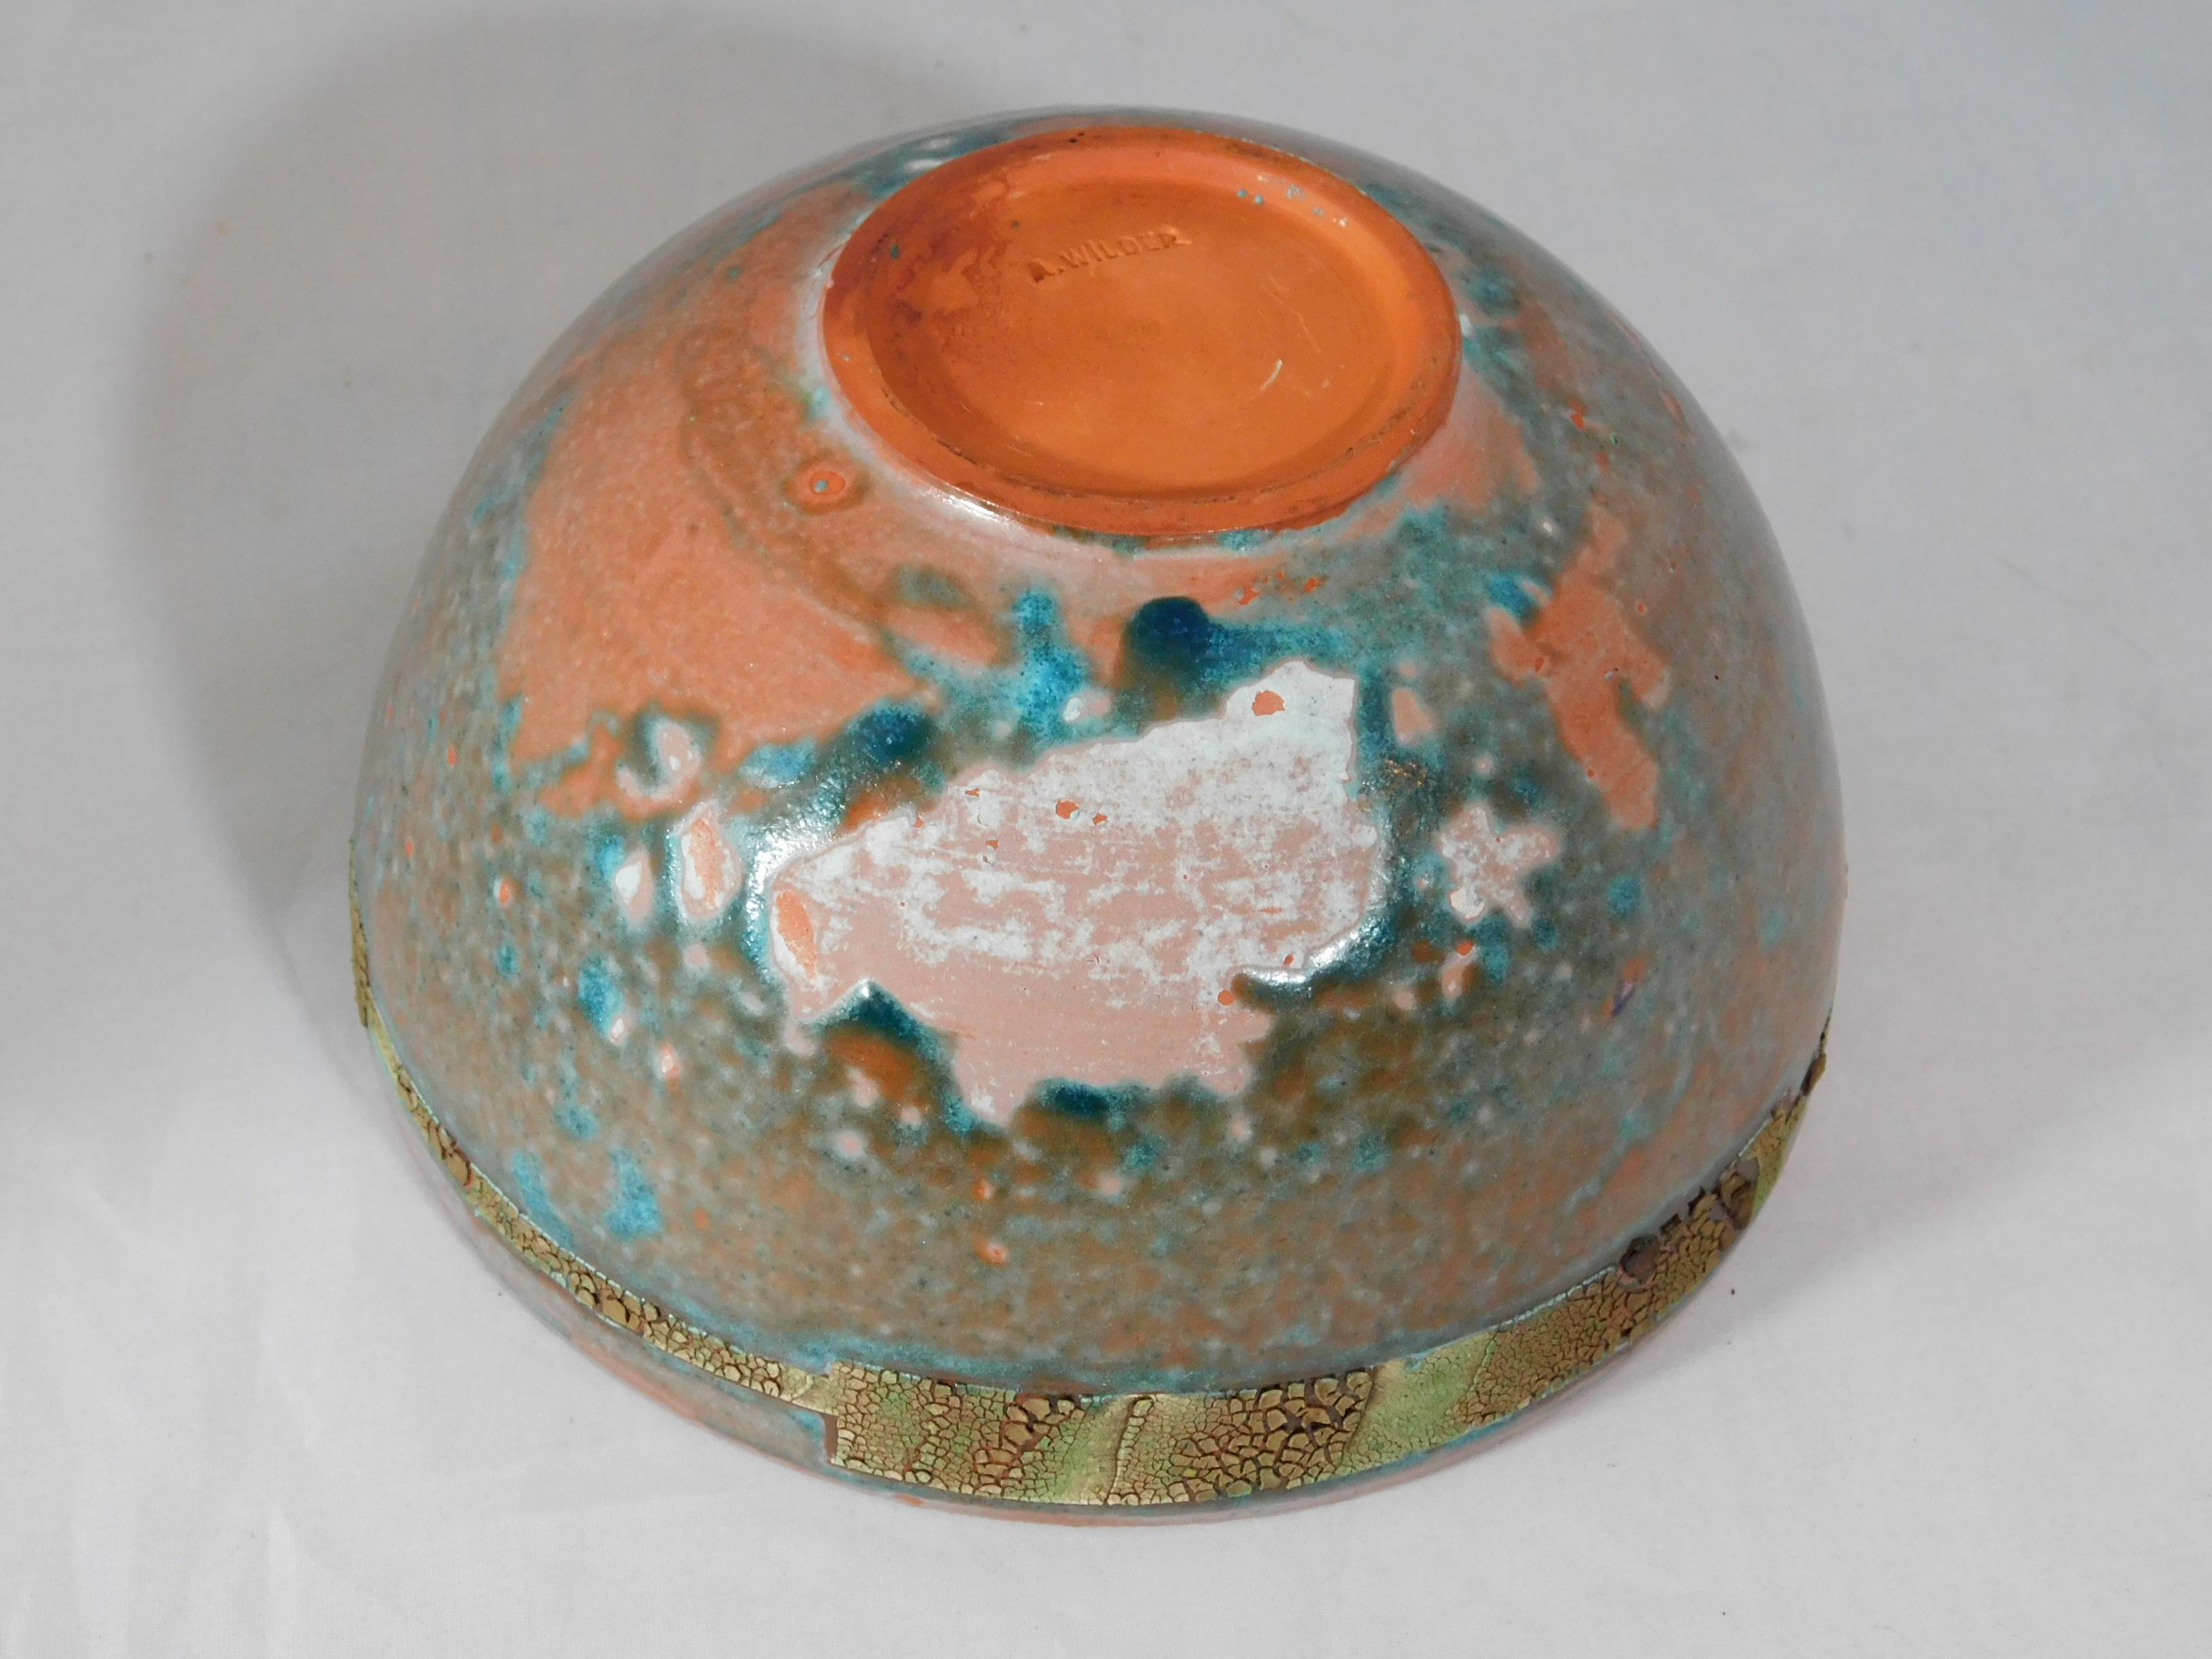 Contemporary Verdugo Woodlands Earthenware Bowl by Andrew Wilder, 2018